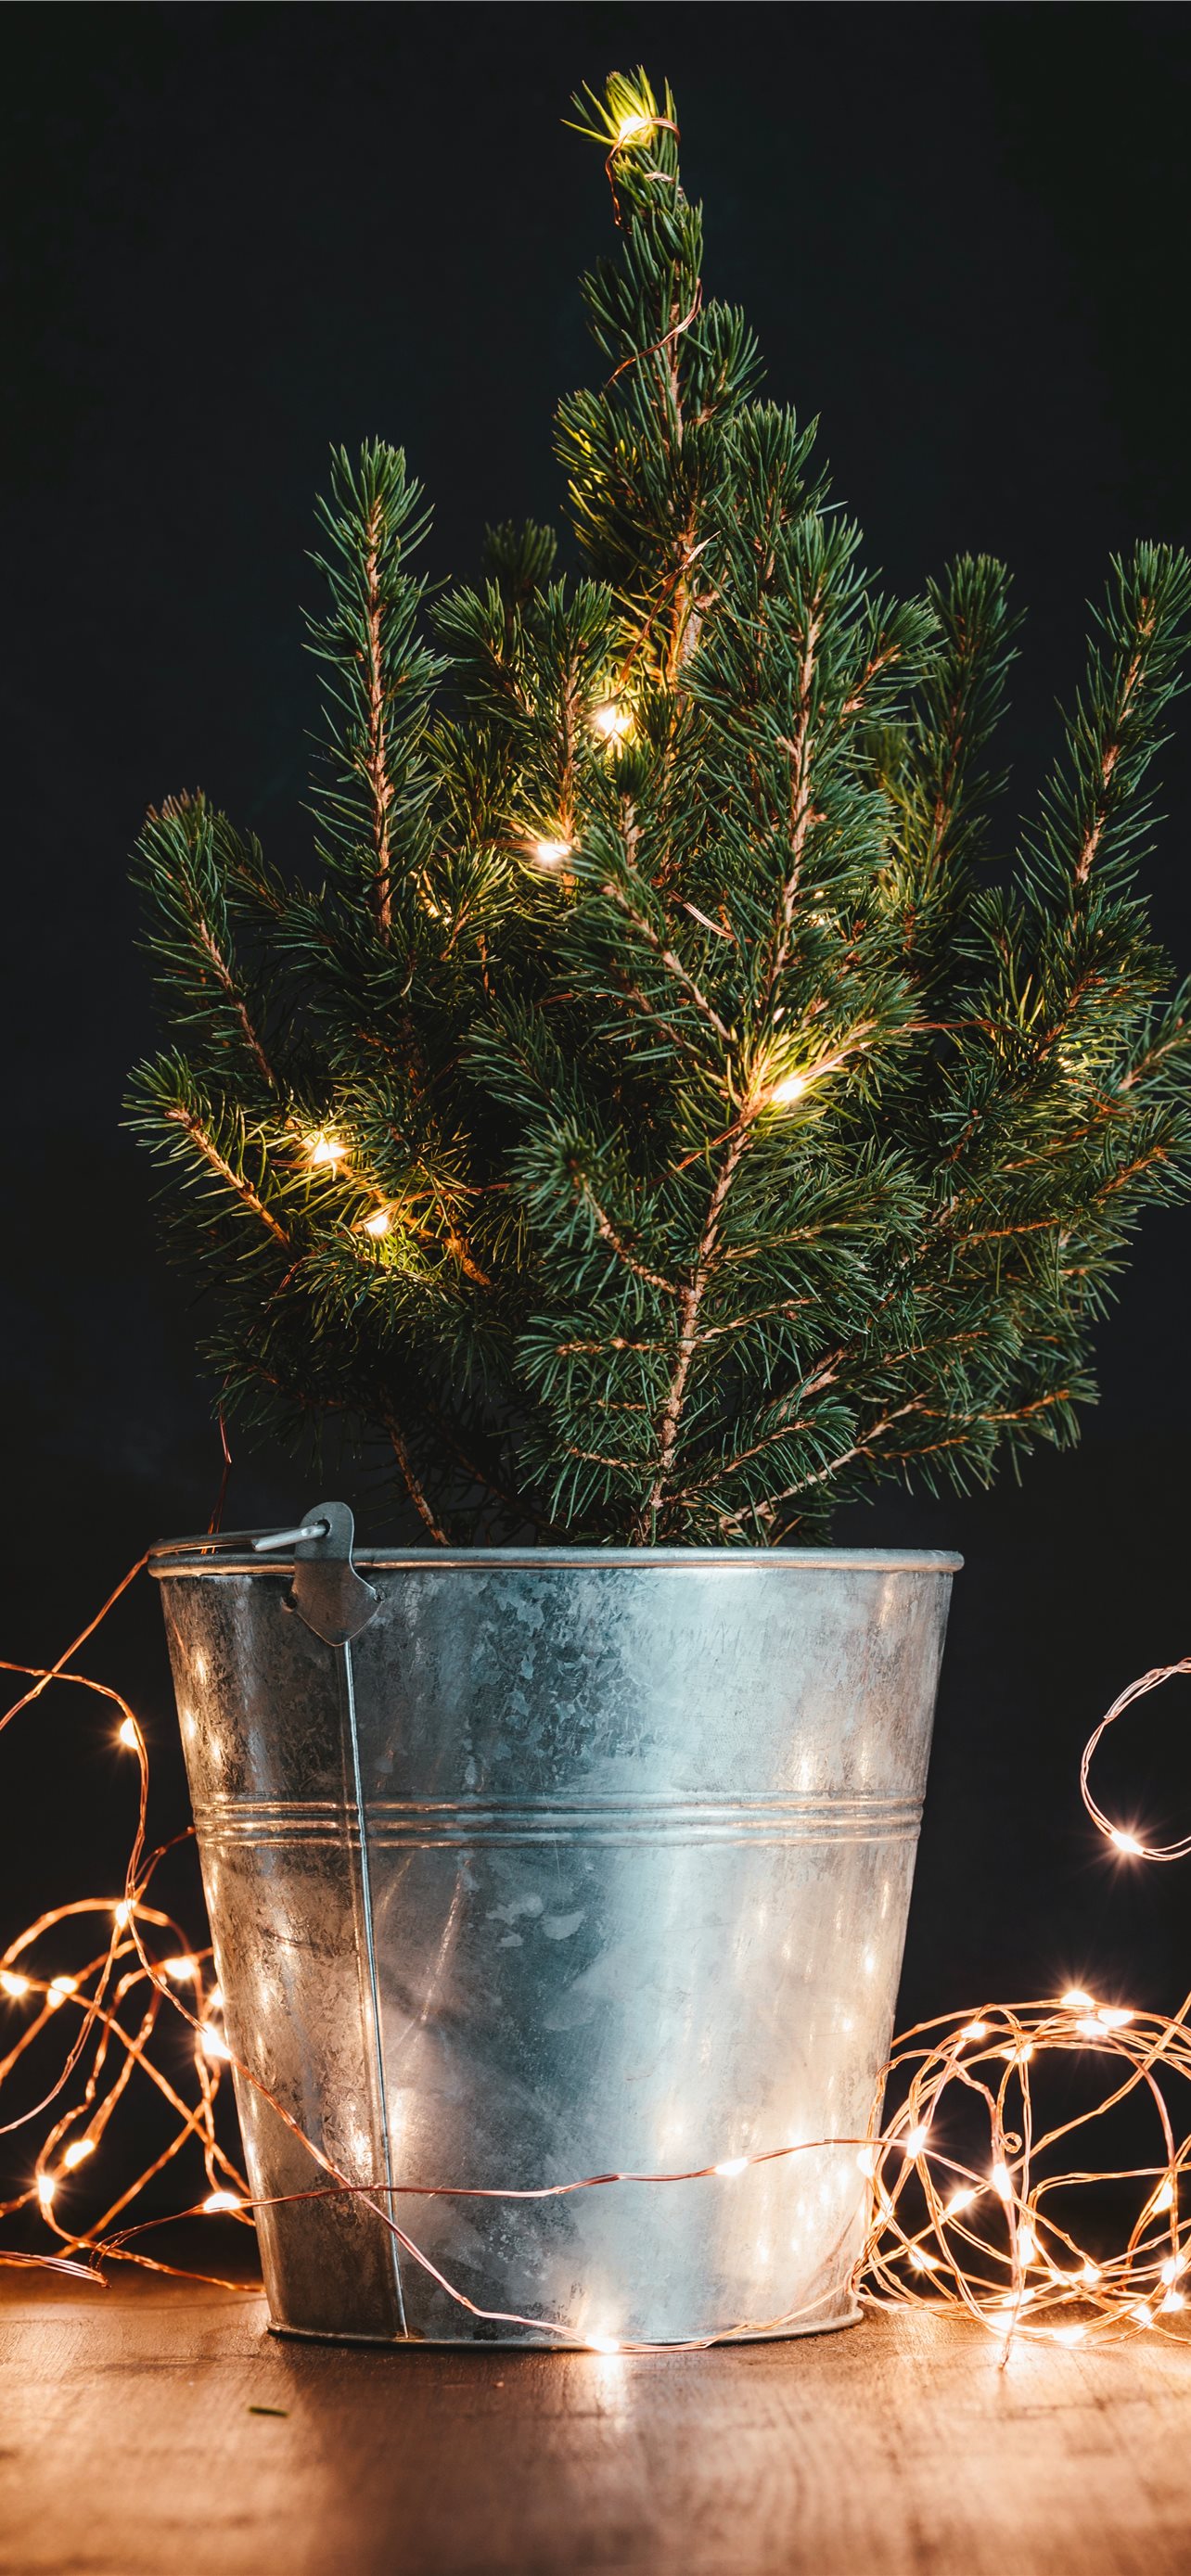 green Christmas tree in bucket with string lights iPhone wallpaper 